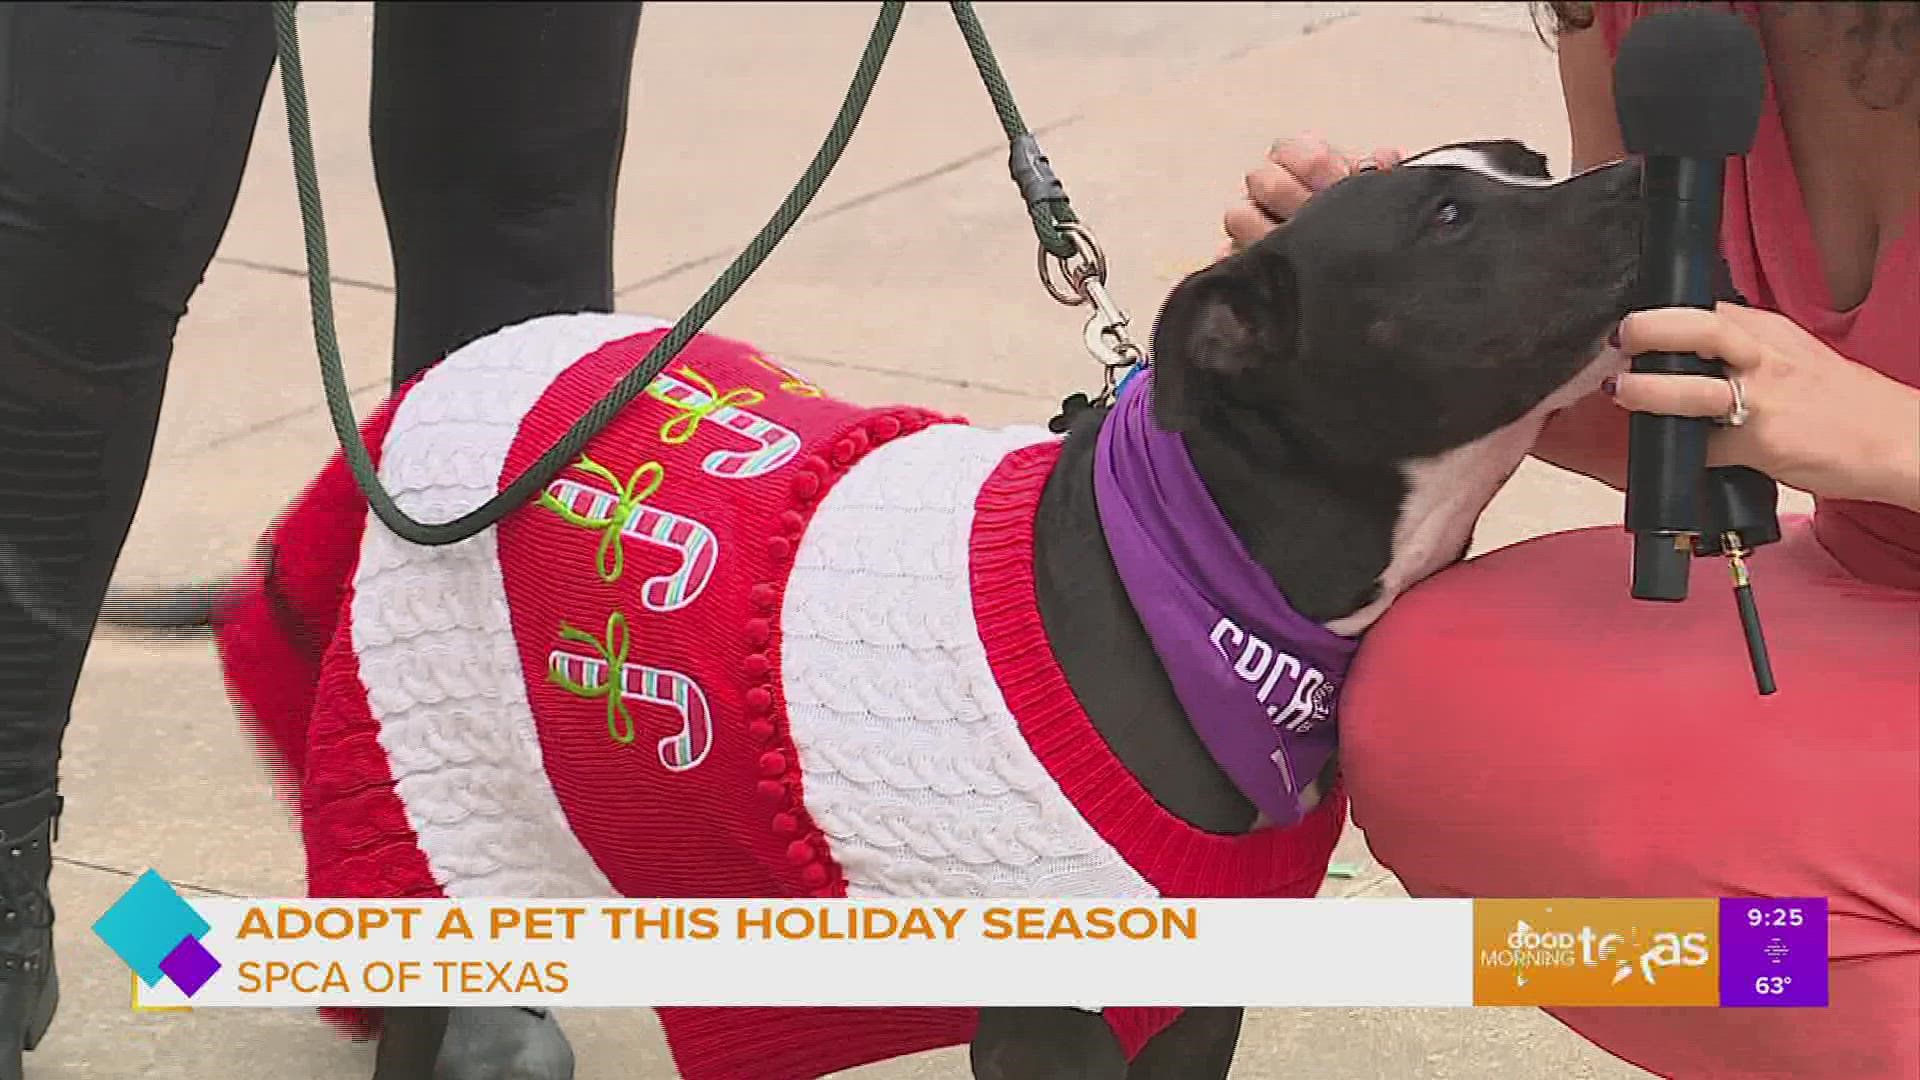 SPCA of Texas is introducing us to some furry friends who are looking for their paw-fect match this season!